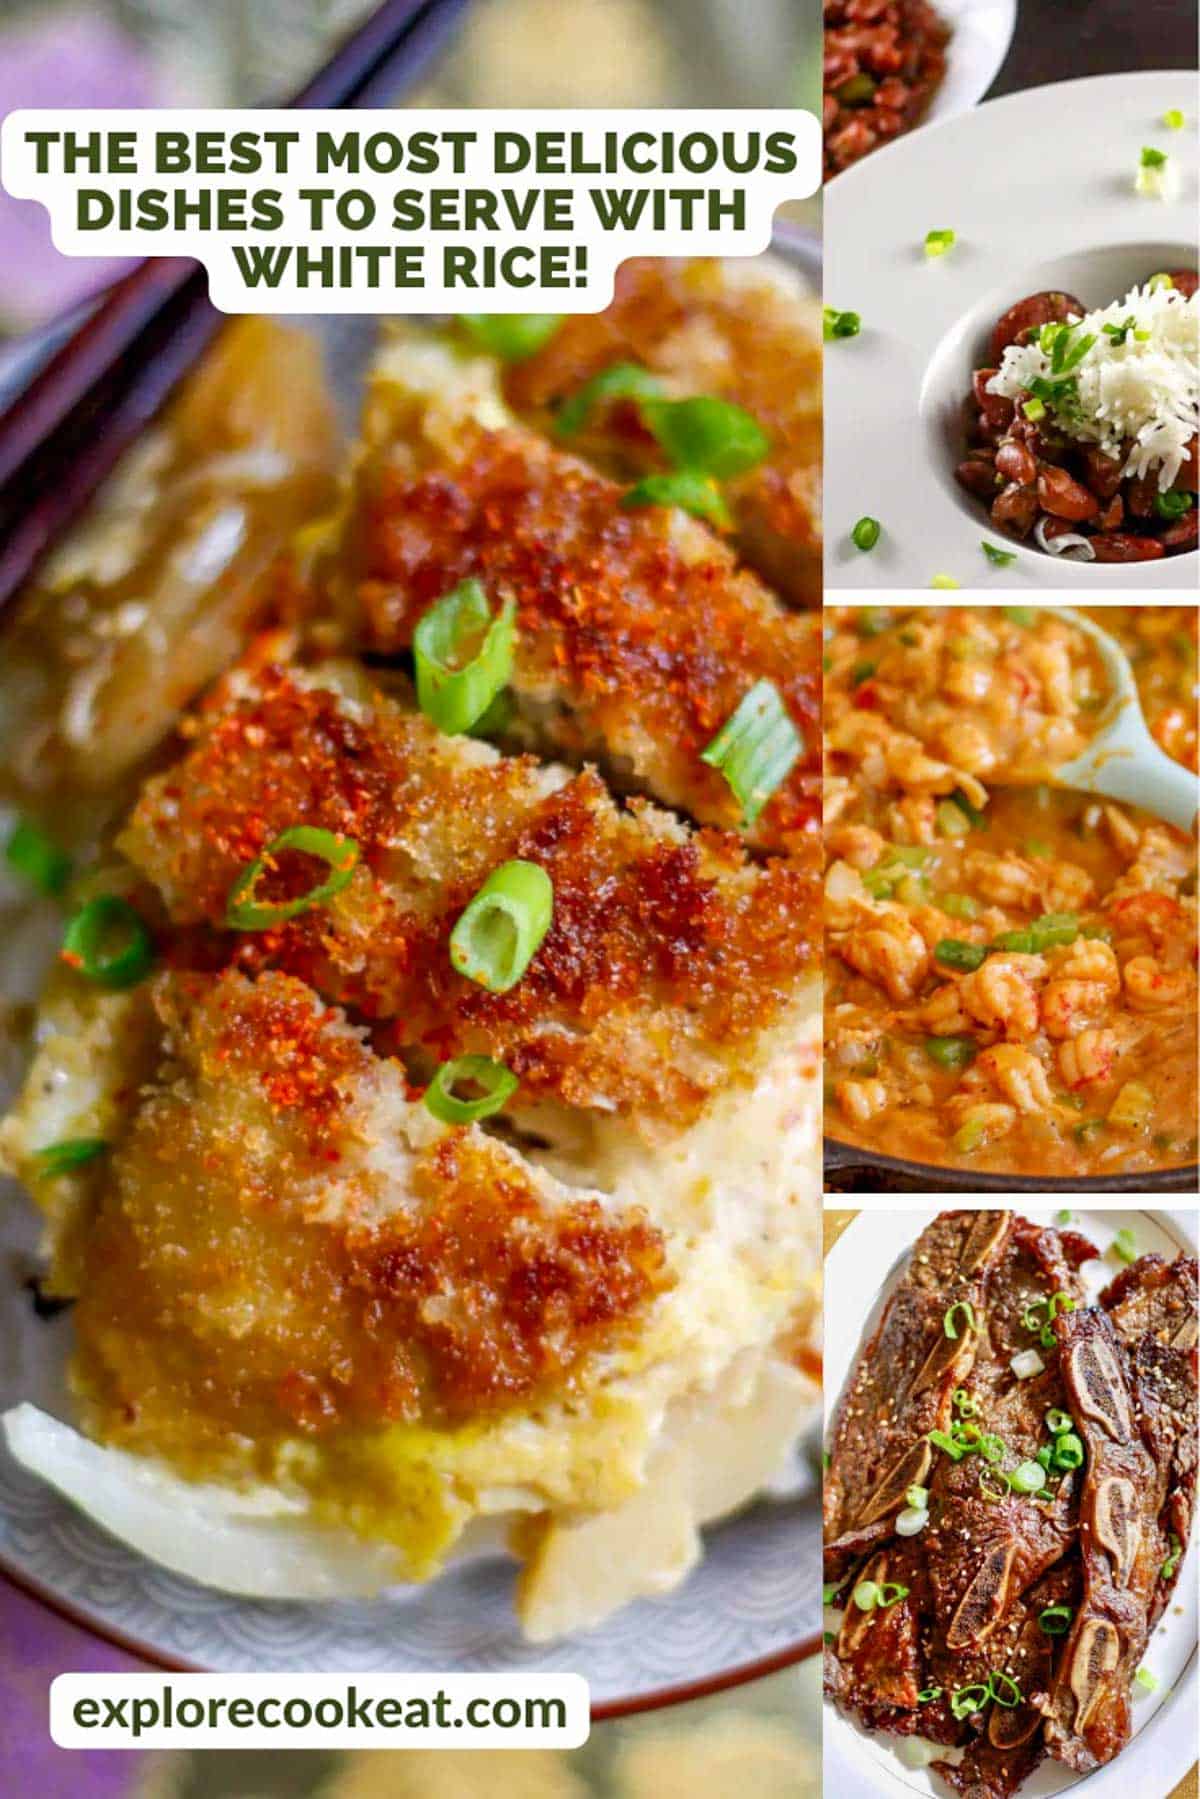 A collage containing Japanese Pork Katsudon, New Orleans Red Beans and Rice, Crawfish Étouffée, and Korean Short Ribs with a text overlay that says The Best Most Delicious Dishes To Serve With White Rice!